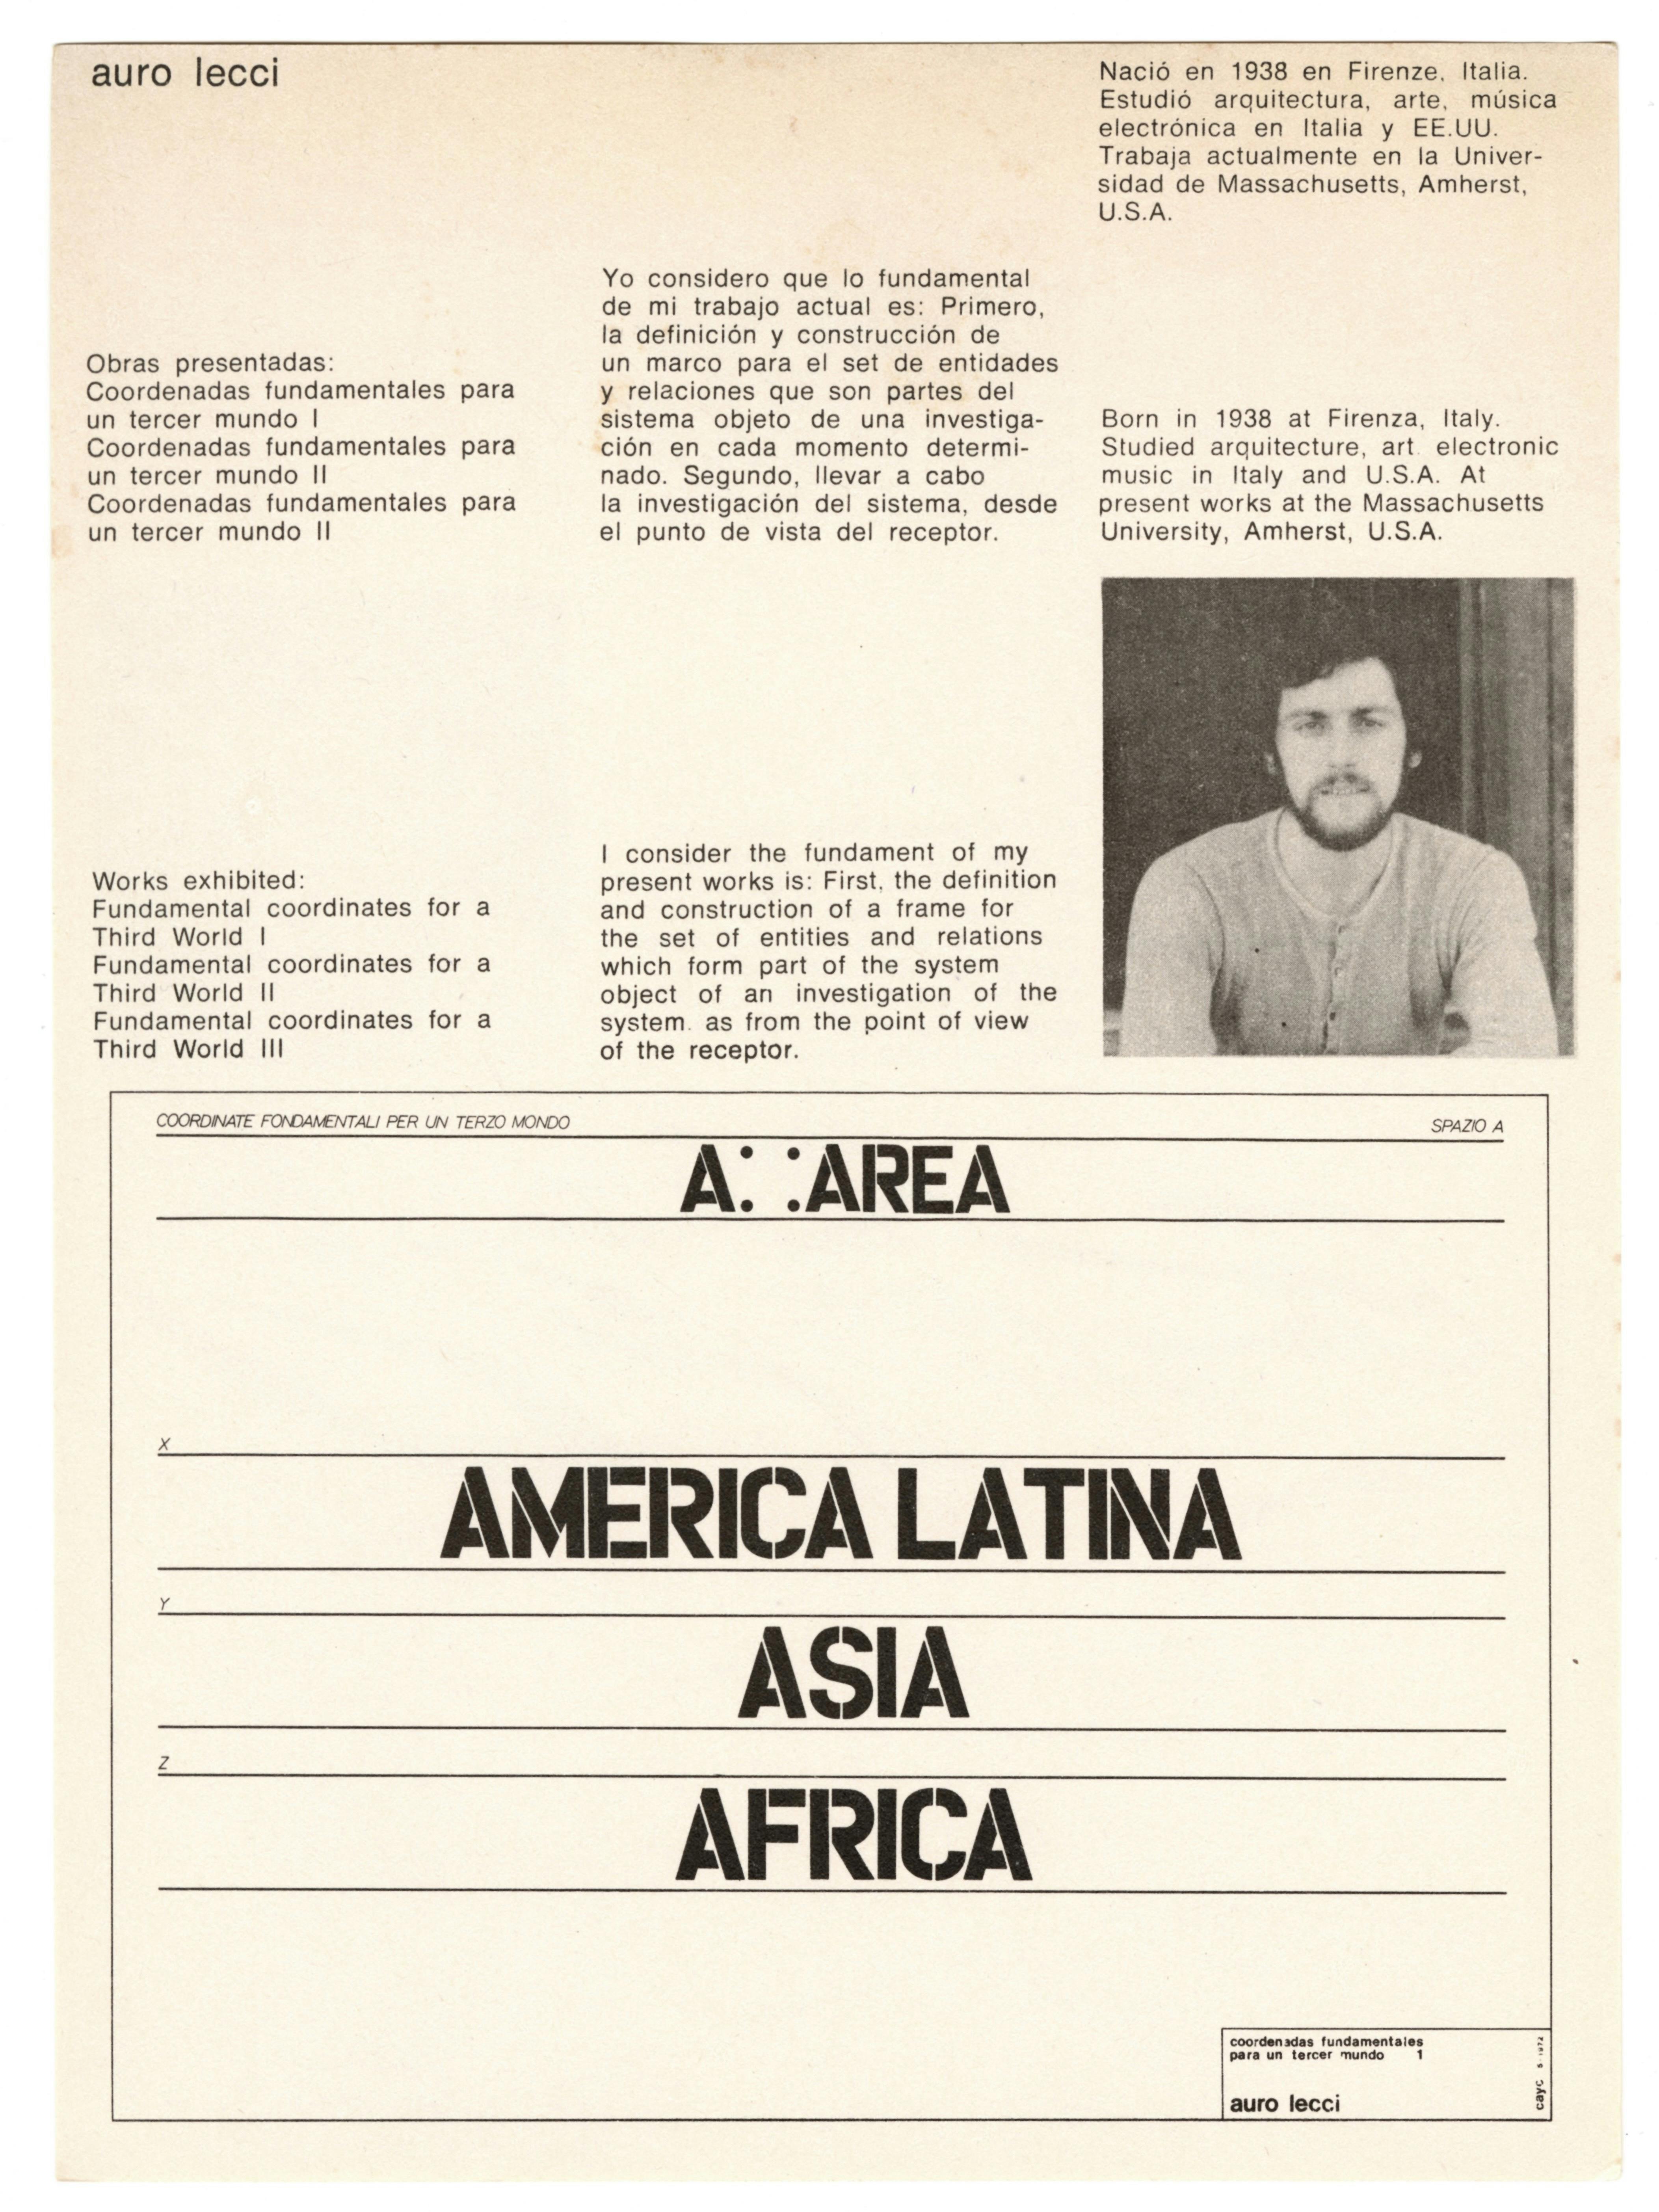 A sheet of white paper, printed with black text. On the top half of the page are printed the artist’s name, Auro Lecci; and, in both Spanish and English, a list of works; biography; artist statement; and portrait. The biography reads: “Born in 1938 at Firenza, Italy. Studied architecture, art, electronic music in Italy and U.S.A. At present works at the Massachusetts University, Amherst, USA.” The list of works reads: “Works exhibited: ‘Fundamental coordinates for a Third World I,' ‘Fundamental coordinates for a Third World II,’ and ‘Fundamental coordinates for a Third World II.’” The artist statement reads: “I consider the fundament of my present works is: First, the definition and construction of a frame for the set of entities and relations which form part of the system object of an investigation of the system as from the point of view of the receptor.” Within a black rectangular outline on the bottom half of the page, horizontal lines are interspersed. with a series of texts reading, from top to bottom, “Coordinate fondamentali per un terzo mondo,” “A” and “area” separated by four dots outlining a square, “America Latina,” “Asia,” and “Africa.” In a small box at the bottom right corner of the larger black rectangular outline, the artist’s name appears in small black letters.